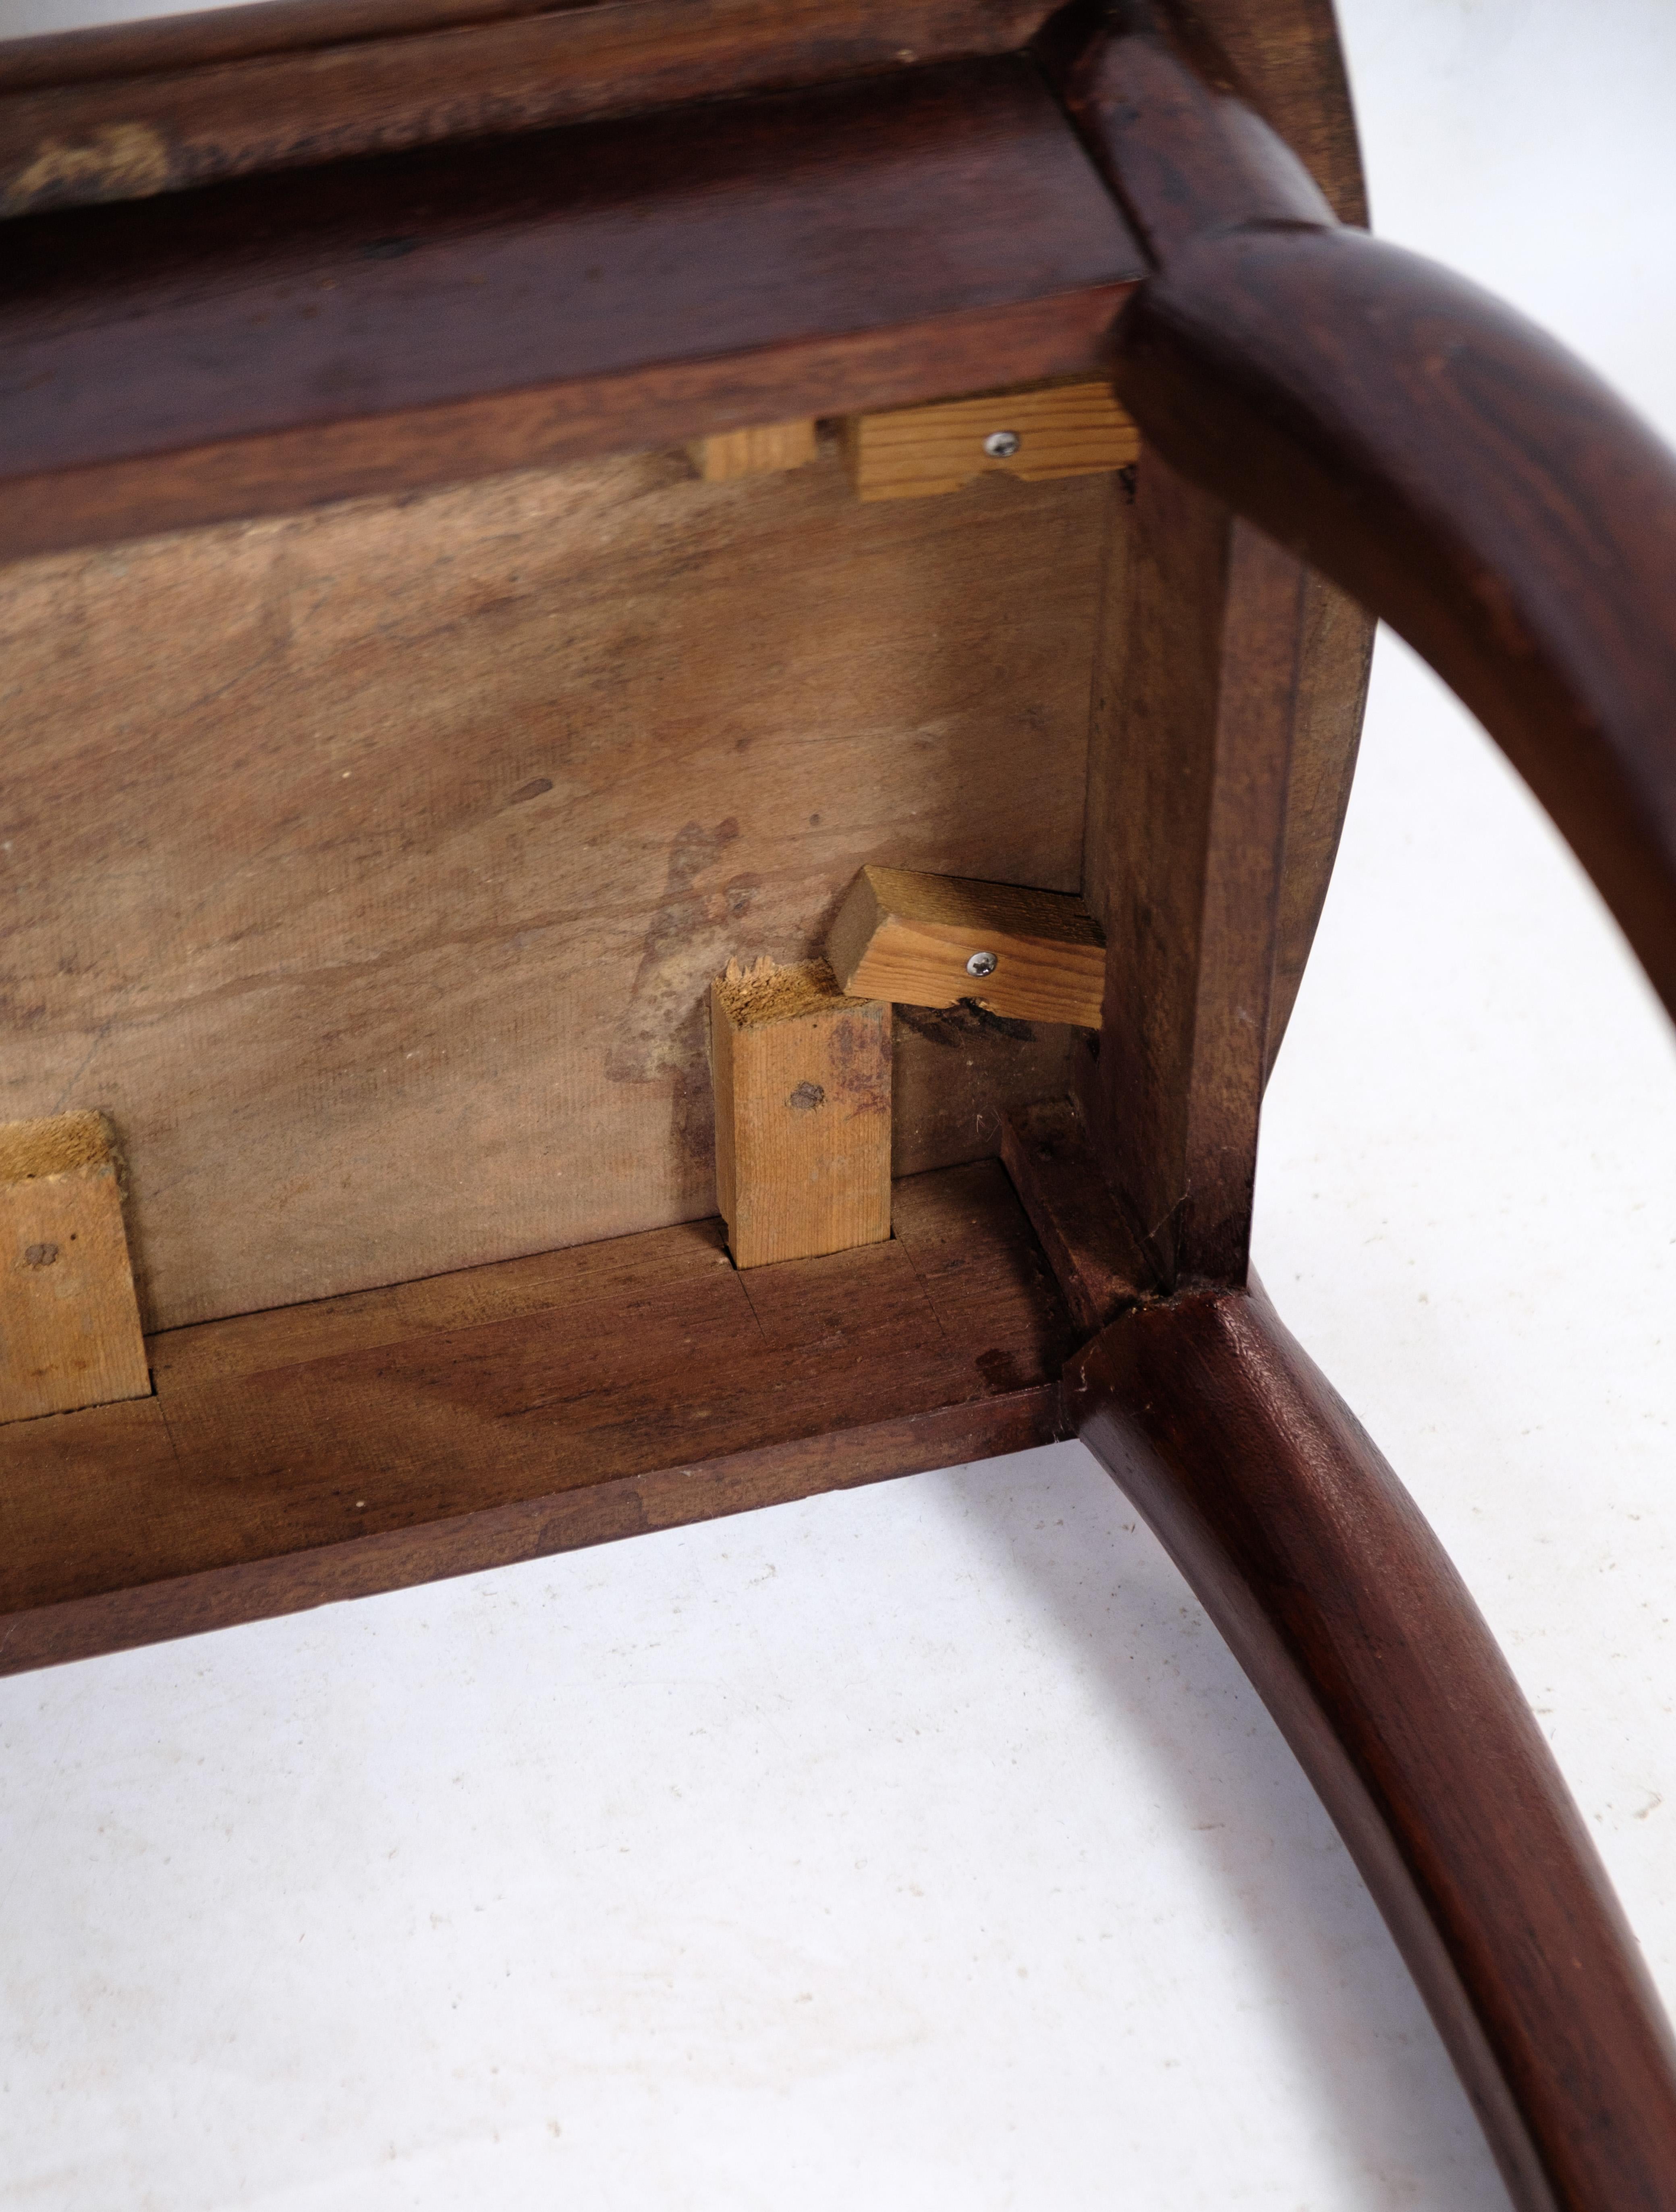 Mahogany side table with fine structure in the tabletop from around the 1880s.
Measurements in cm: H:76.5 W:61 D:36.5.